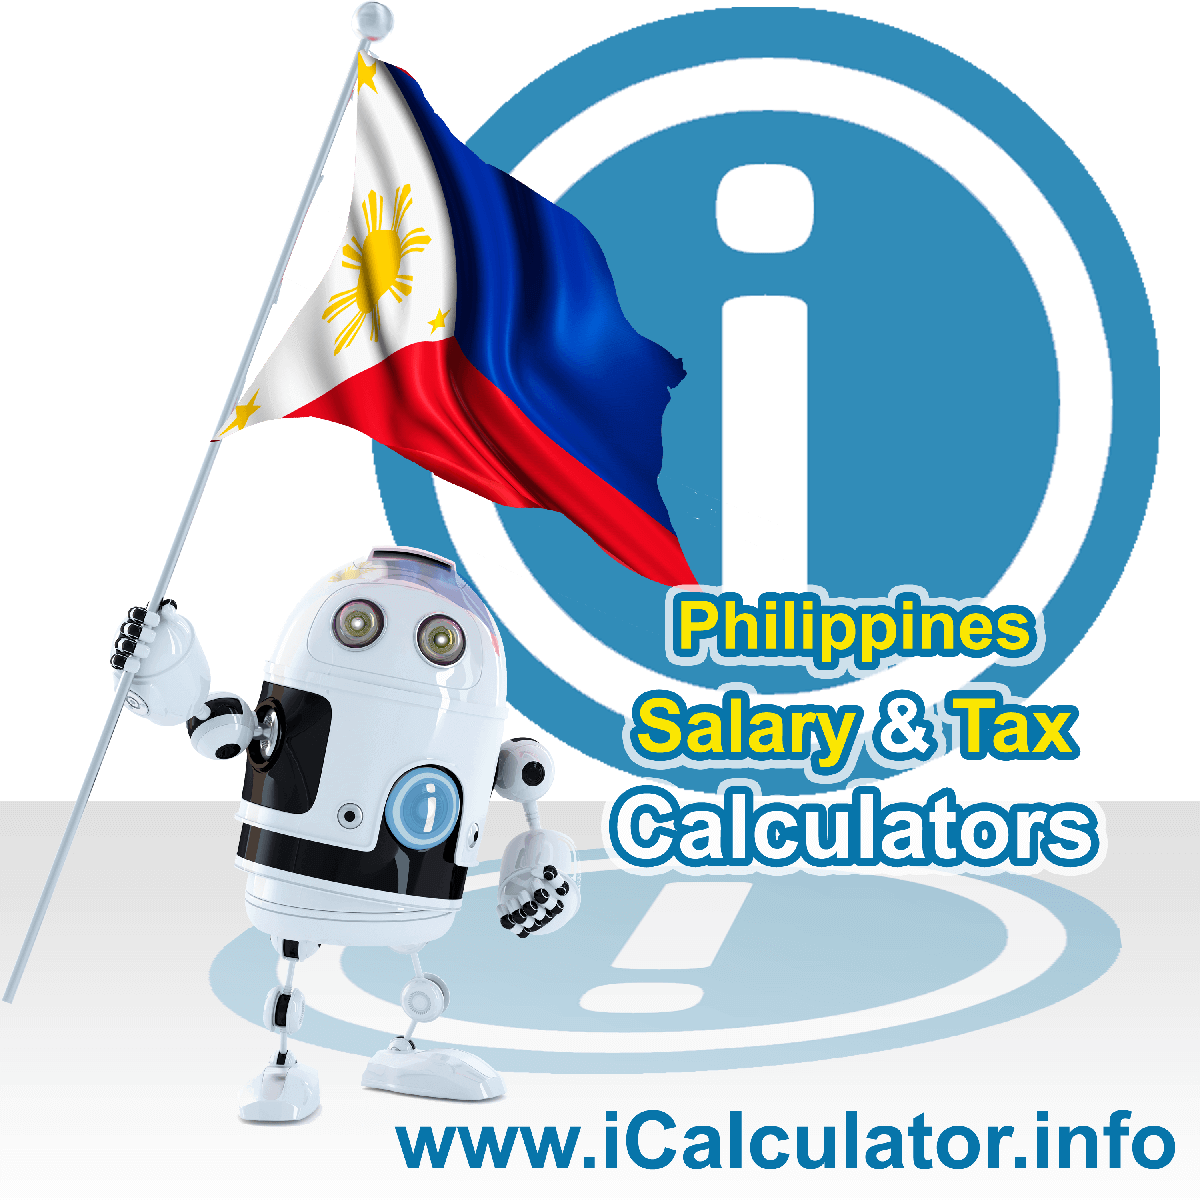 Philippines Tax Calculator. This image shows the Philippines flag and information relating to the tax formula for the Philippines Salary Calculator